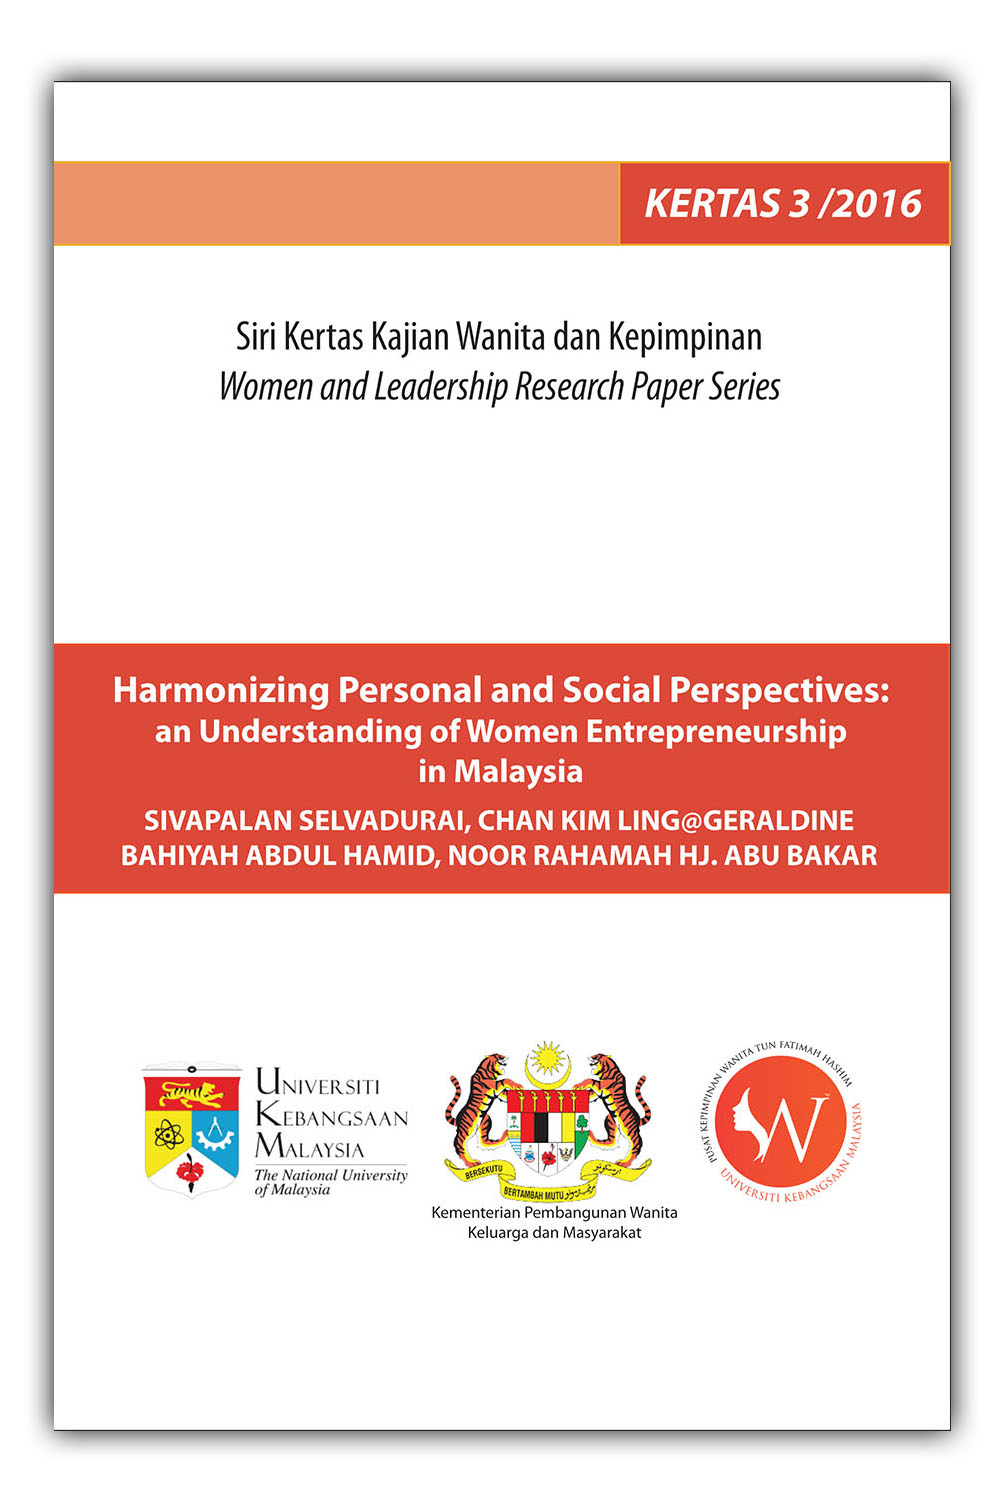 Harmonizing Personal and Social Perspectives: An Understanding of Women Entrepreneurship in Malaysia